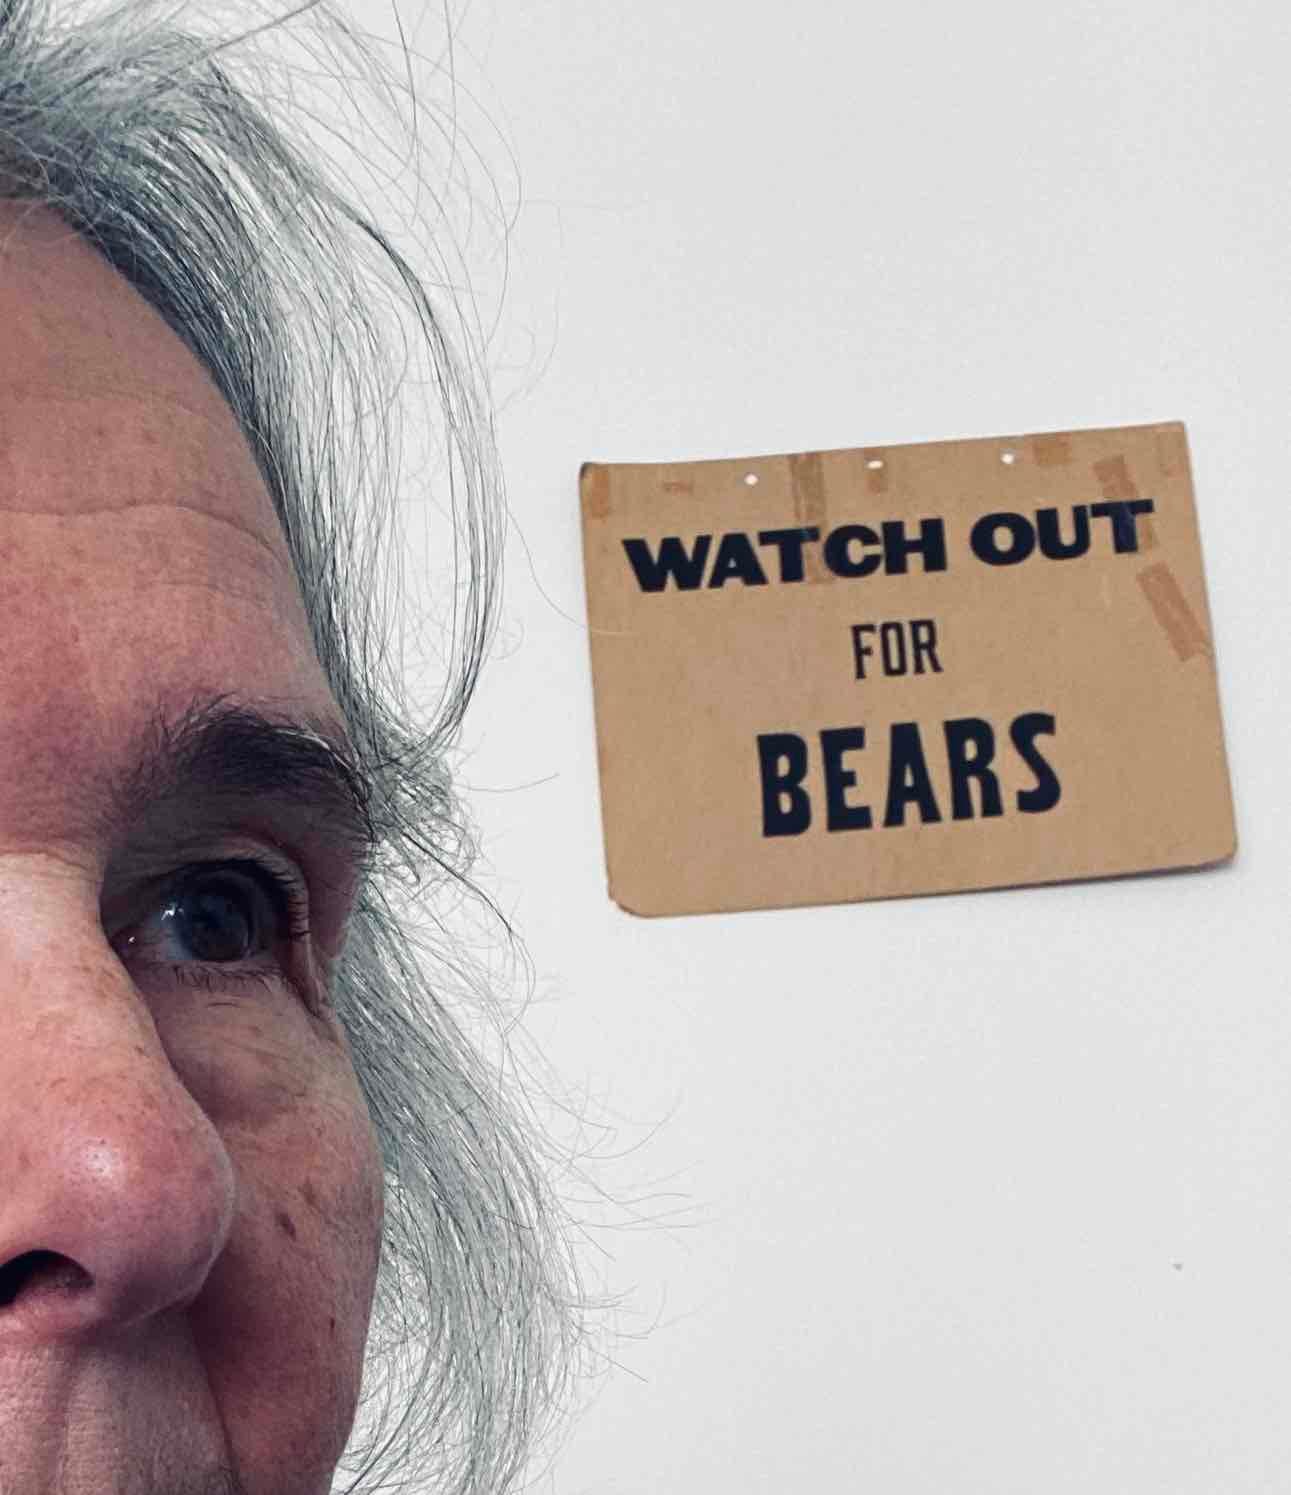 Older woman's face and messy hair, beside a sign reading "Watch out for BEARS"